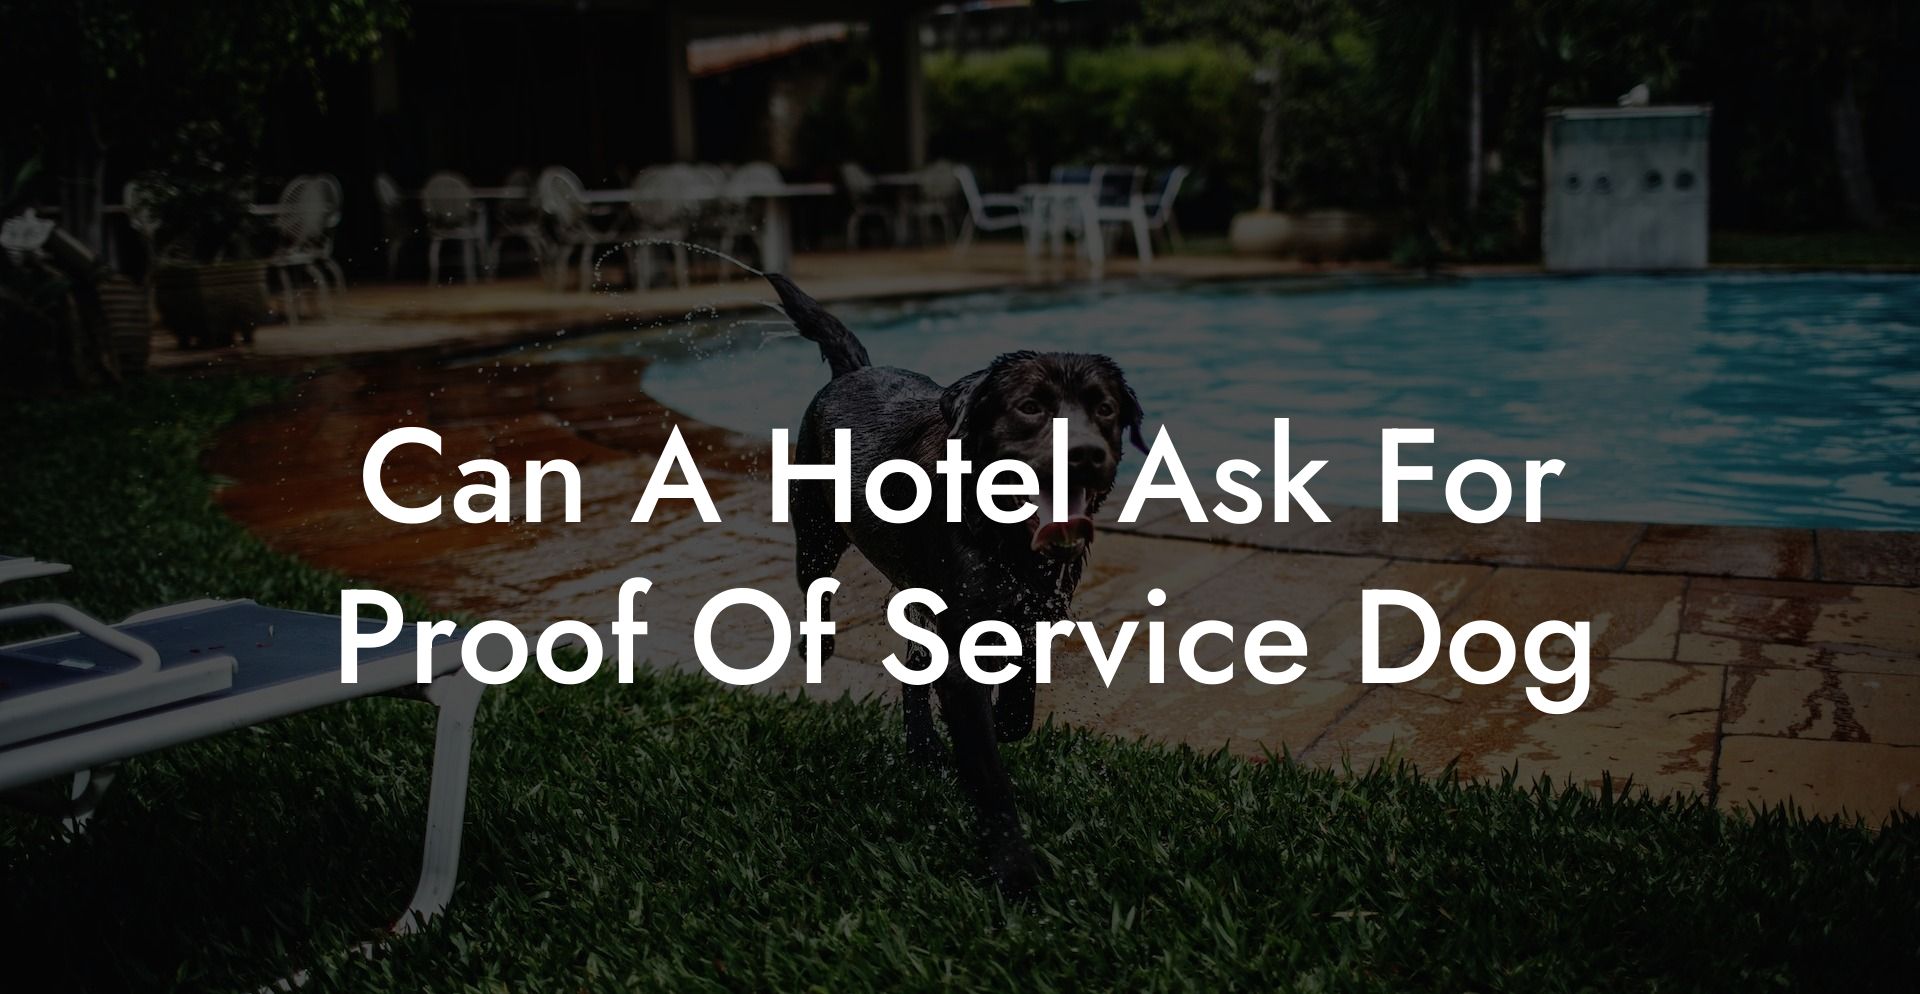 Can A Hotel Ask For Proof Of Service Dog